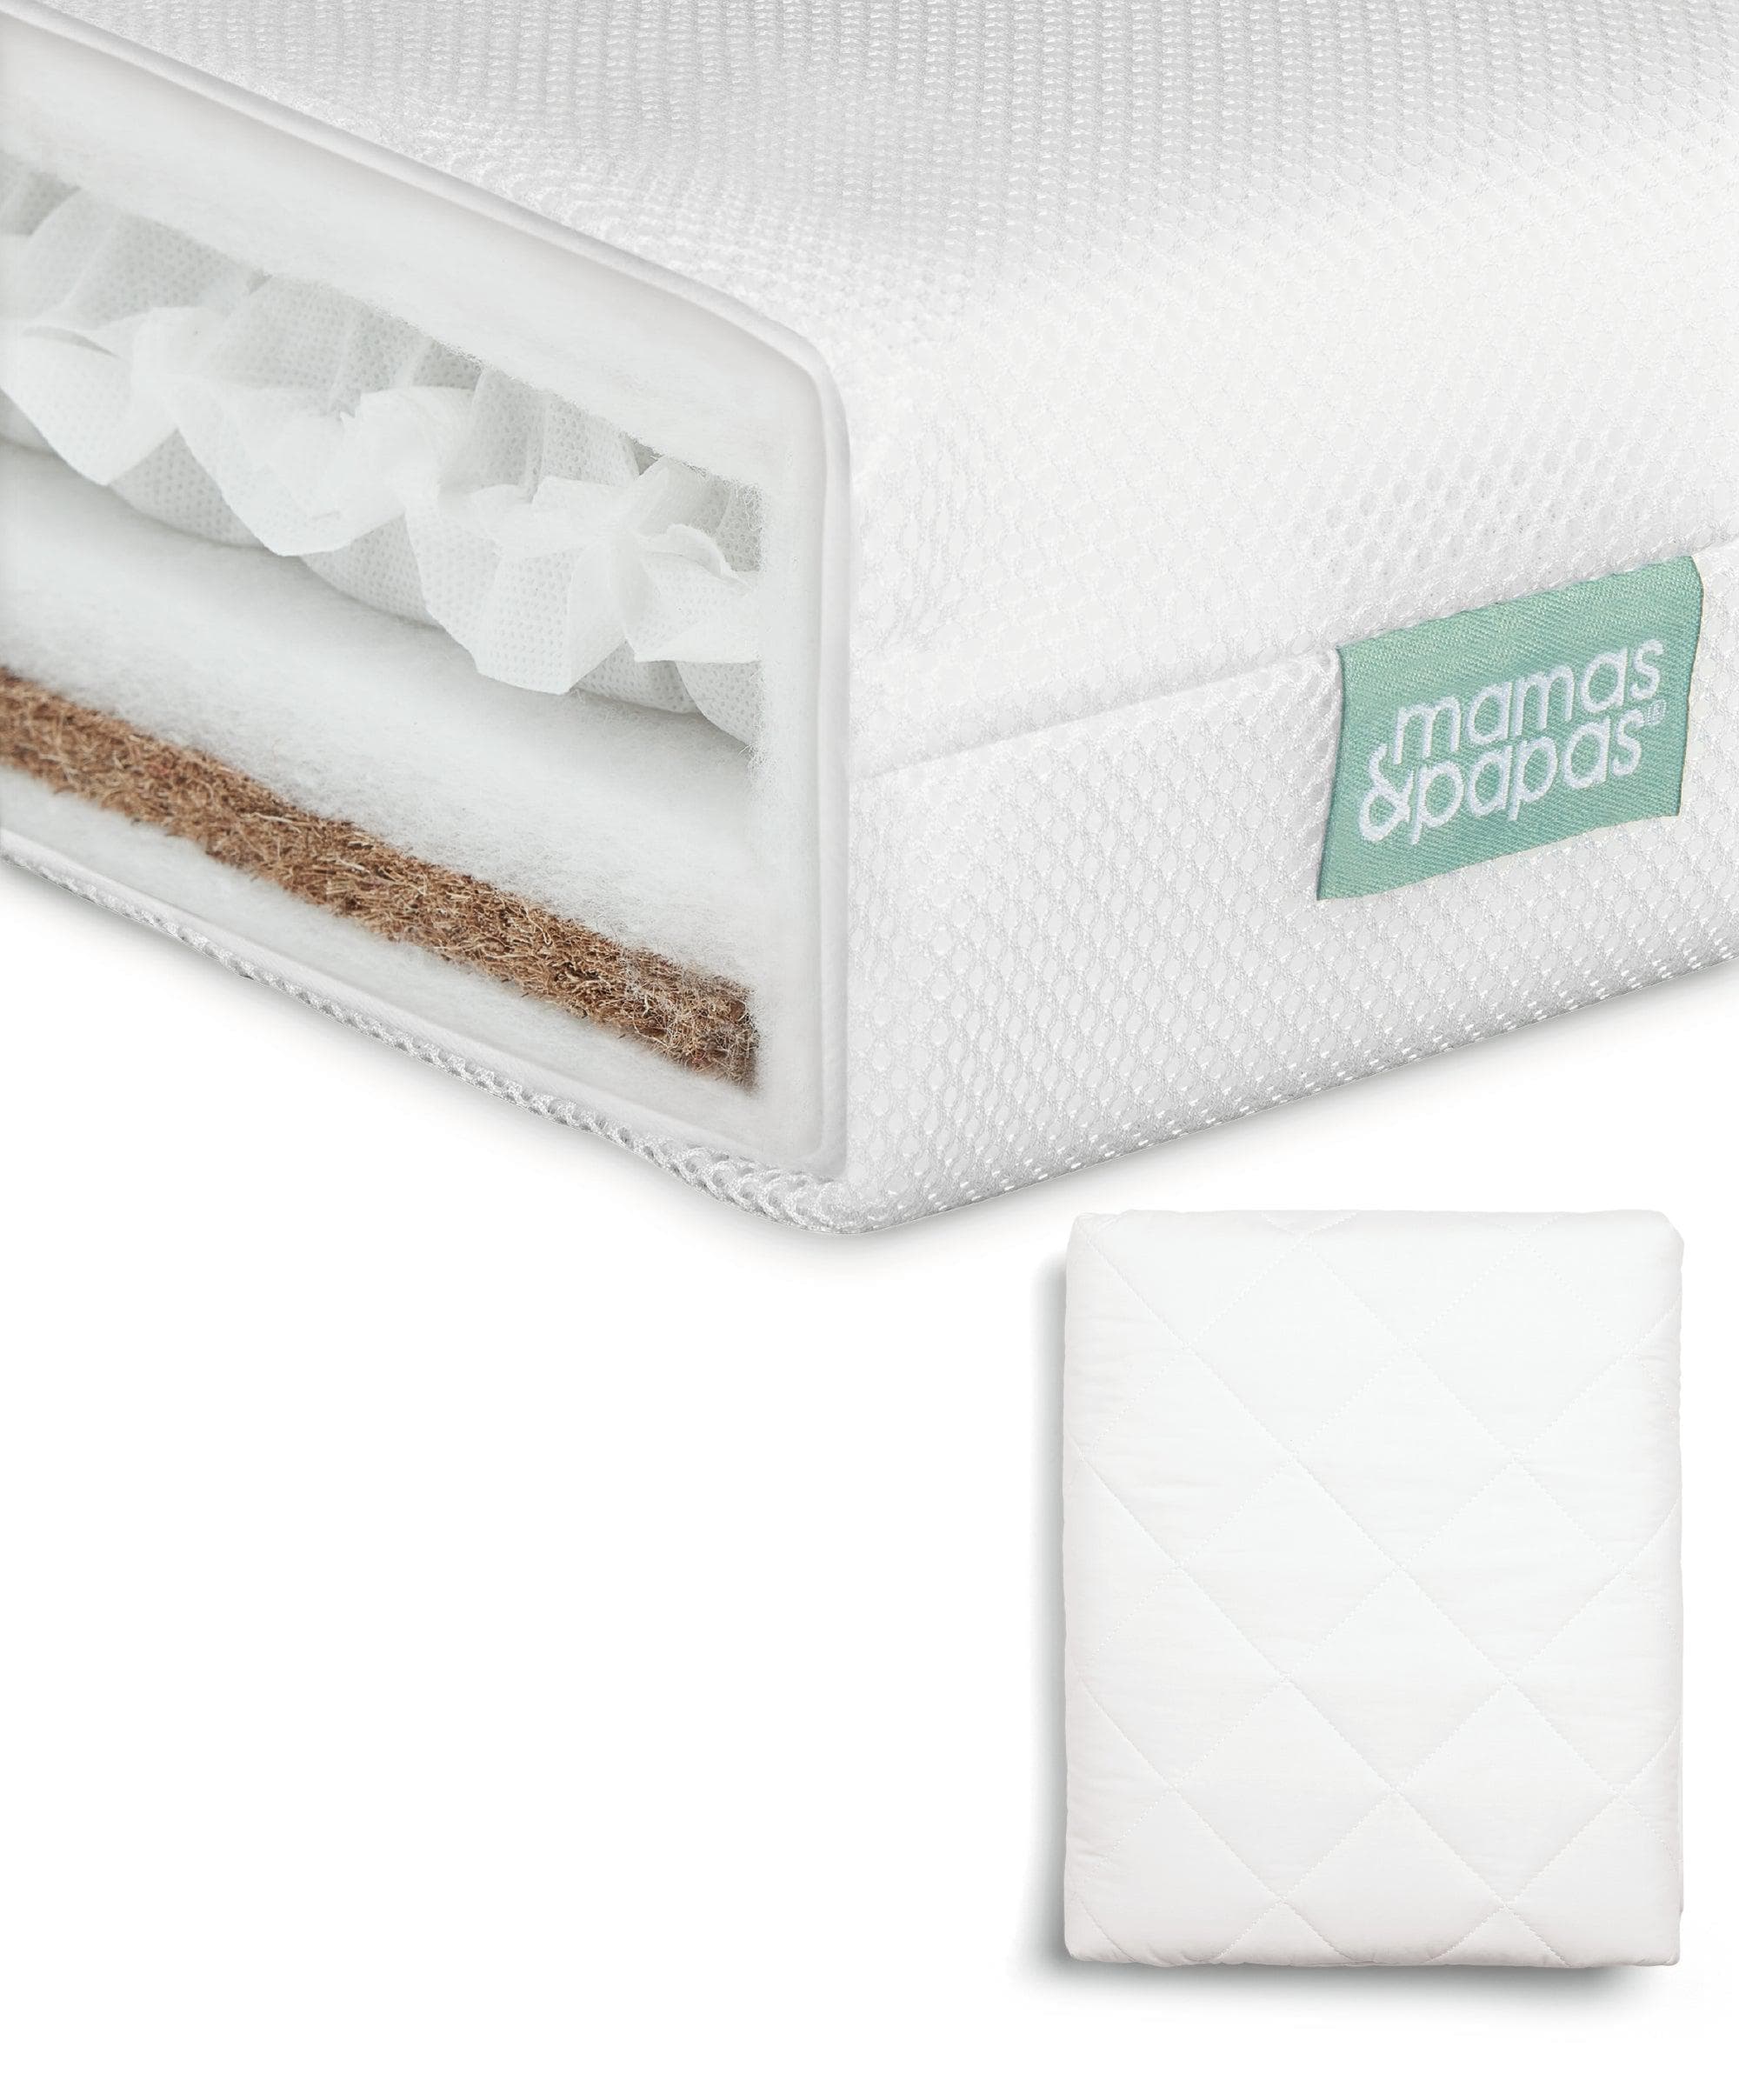 Premium Dual Core Cotbed Mattress & Anti-Allergy Quilted Cotbed Mattress Protector Bundle